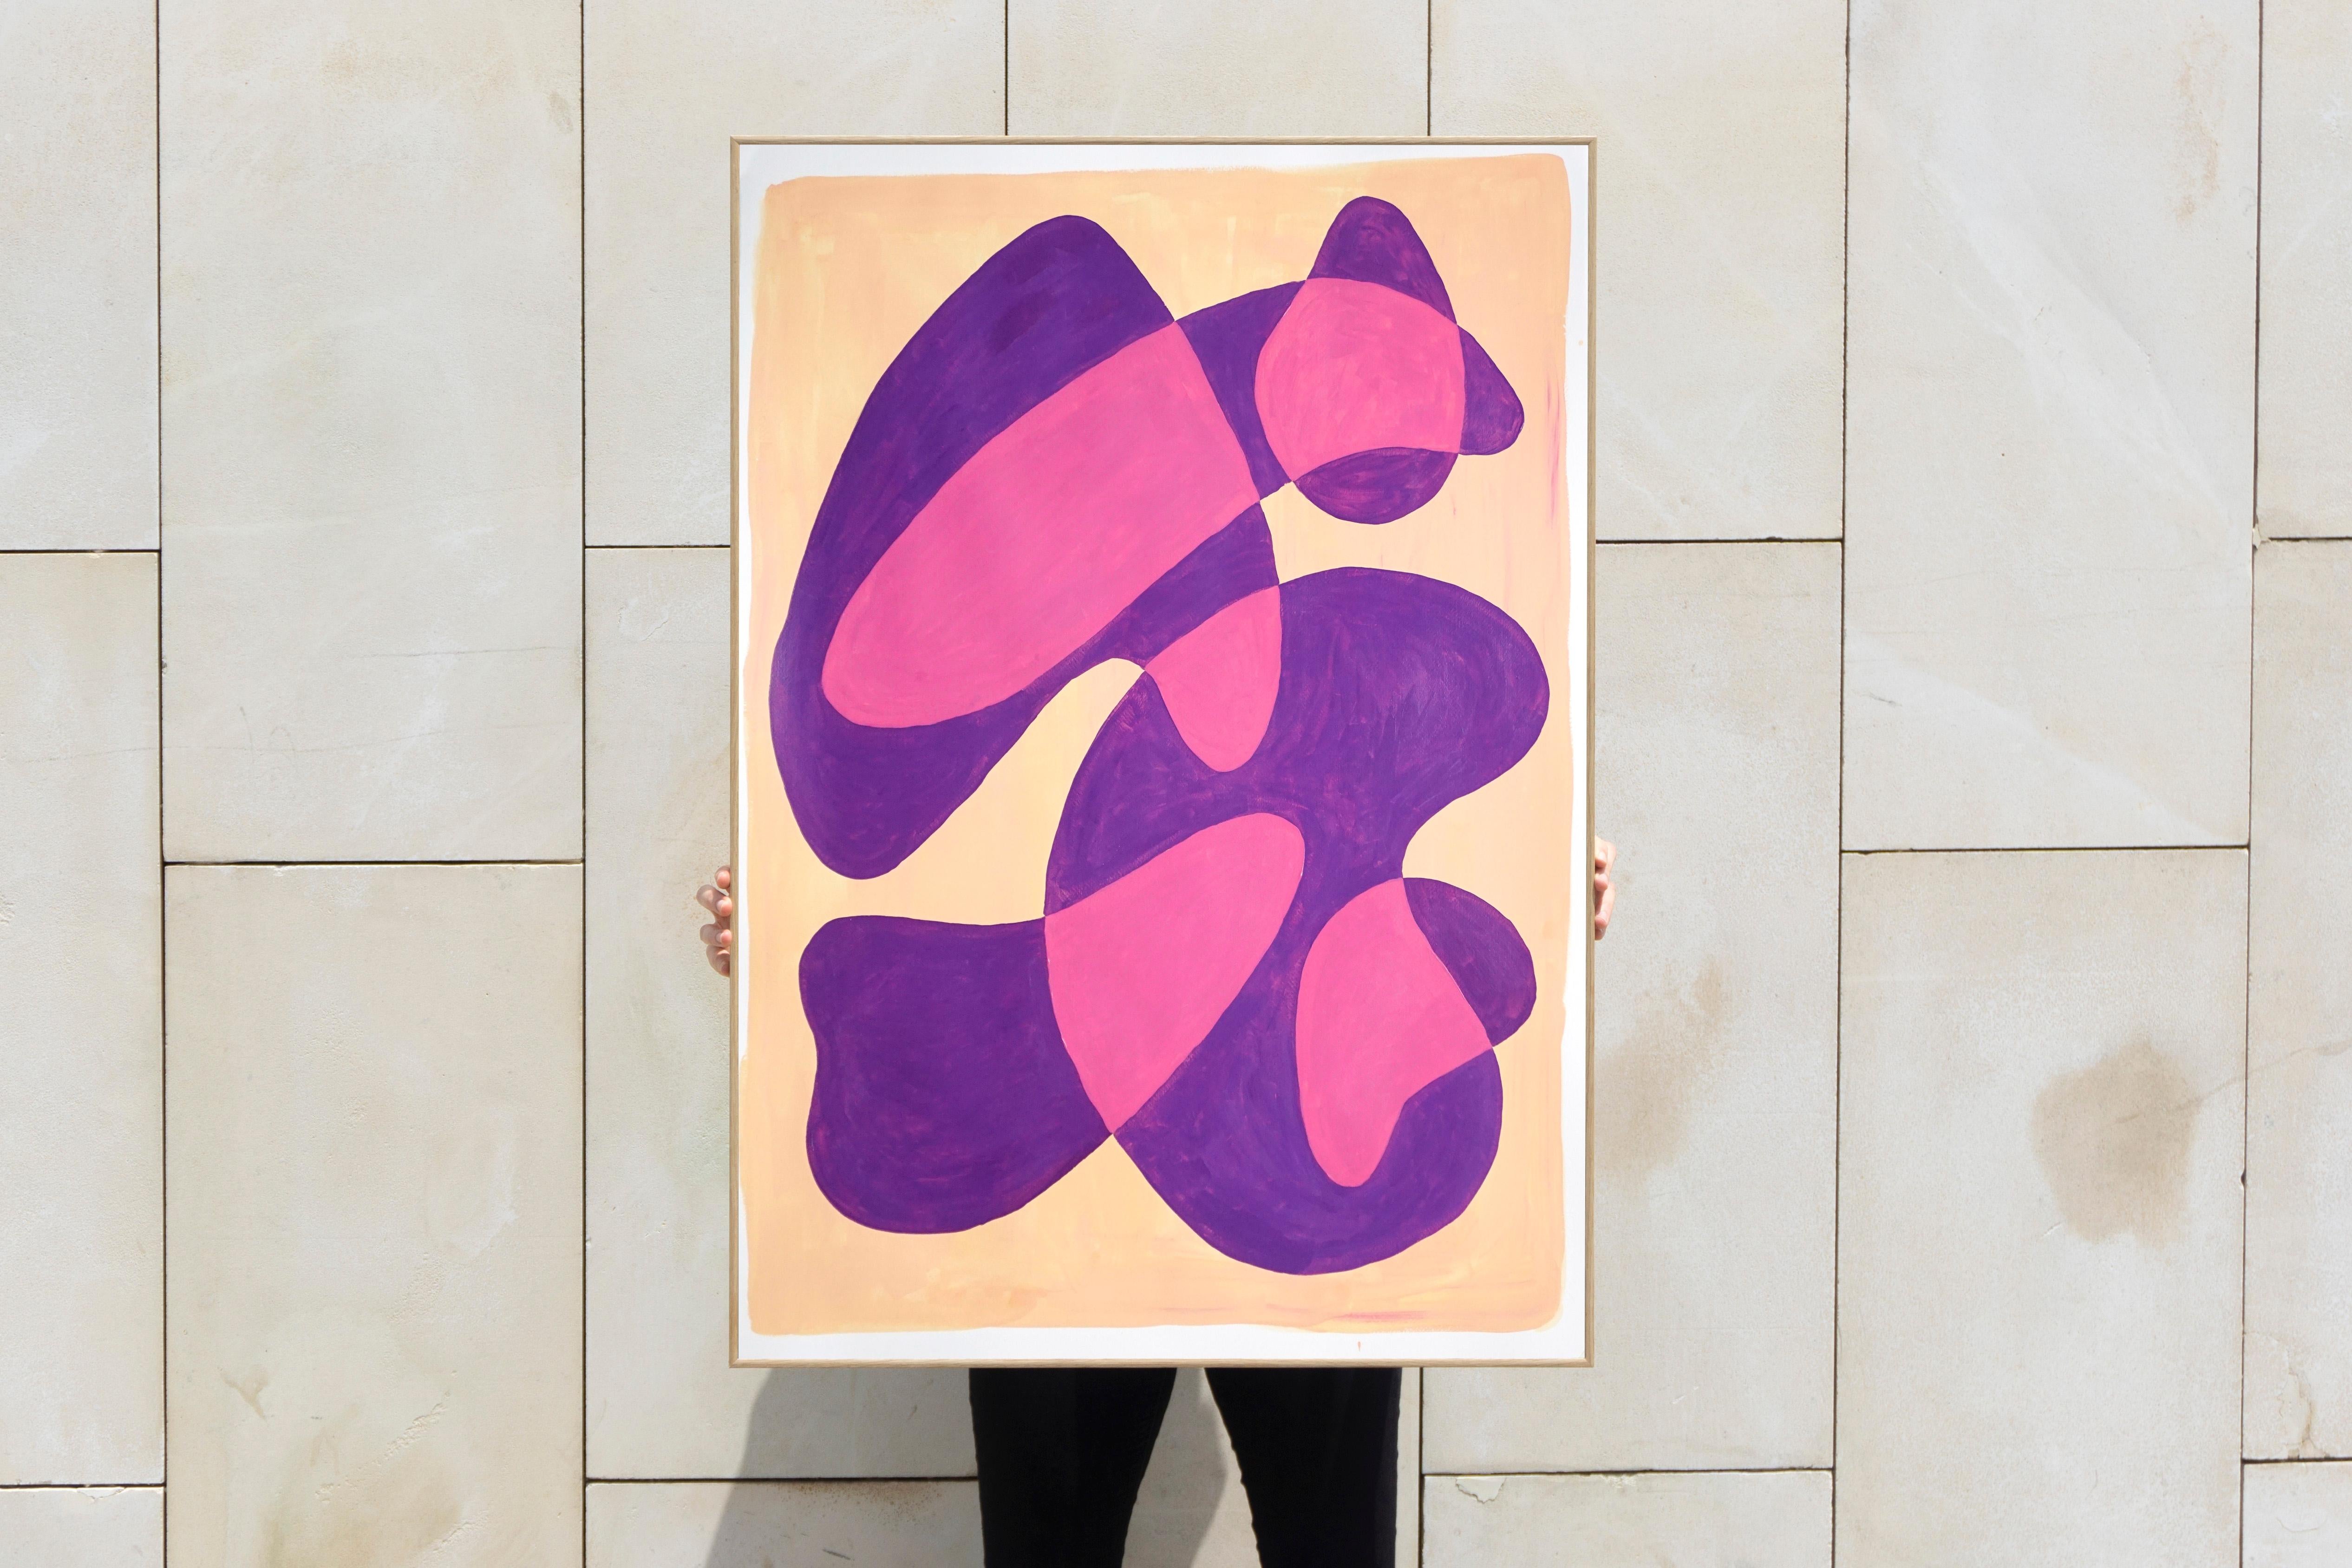 Translucent Purple Bubbles, Mid-Century Shapes in Warm Tones, Overlapping Layers - Art Deco Painting by Ryan Rivadeneyra